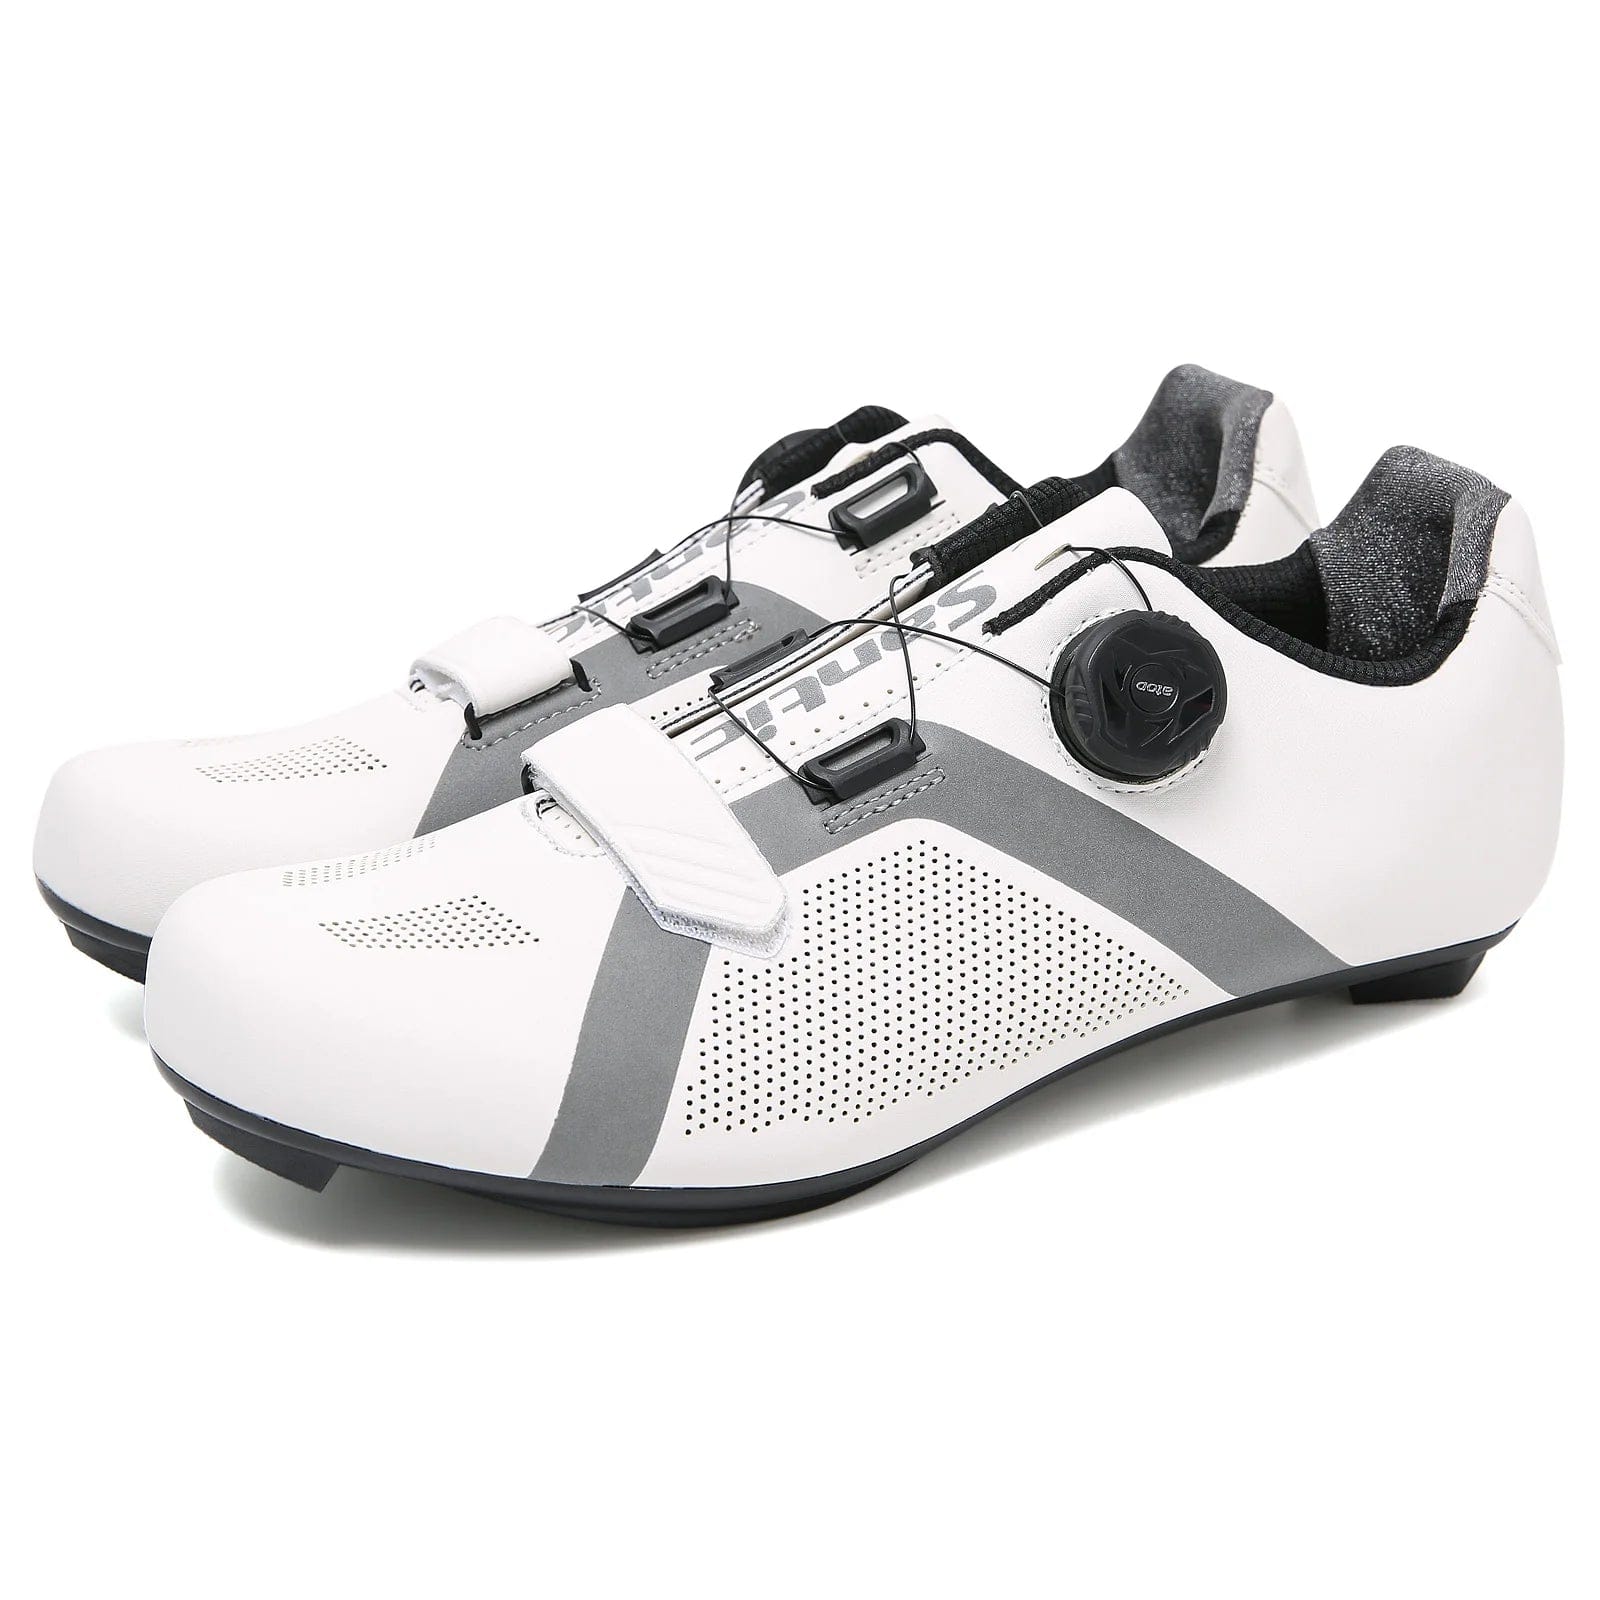 Chaussures cyclisme Swift Spin SANTIC KS200